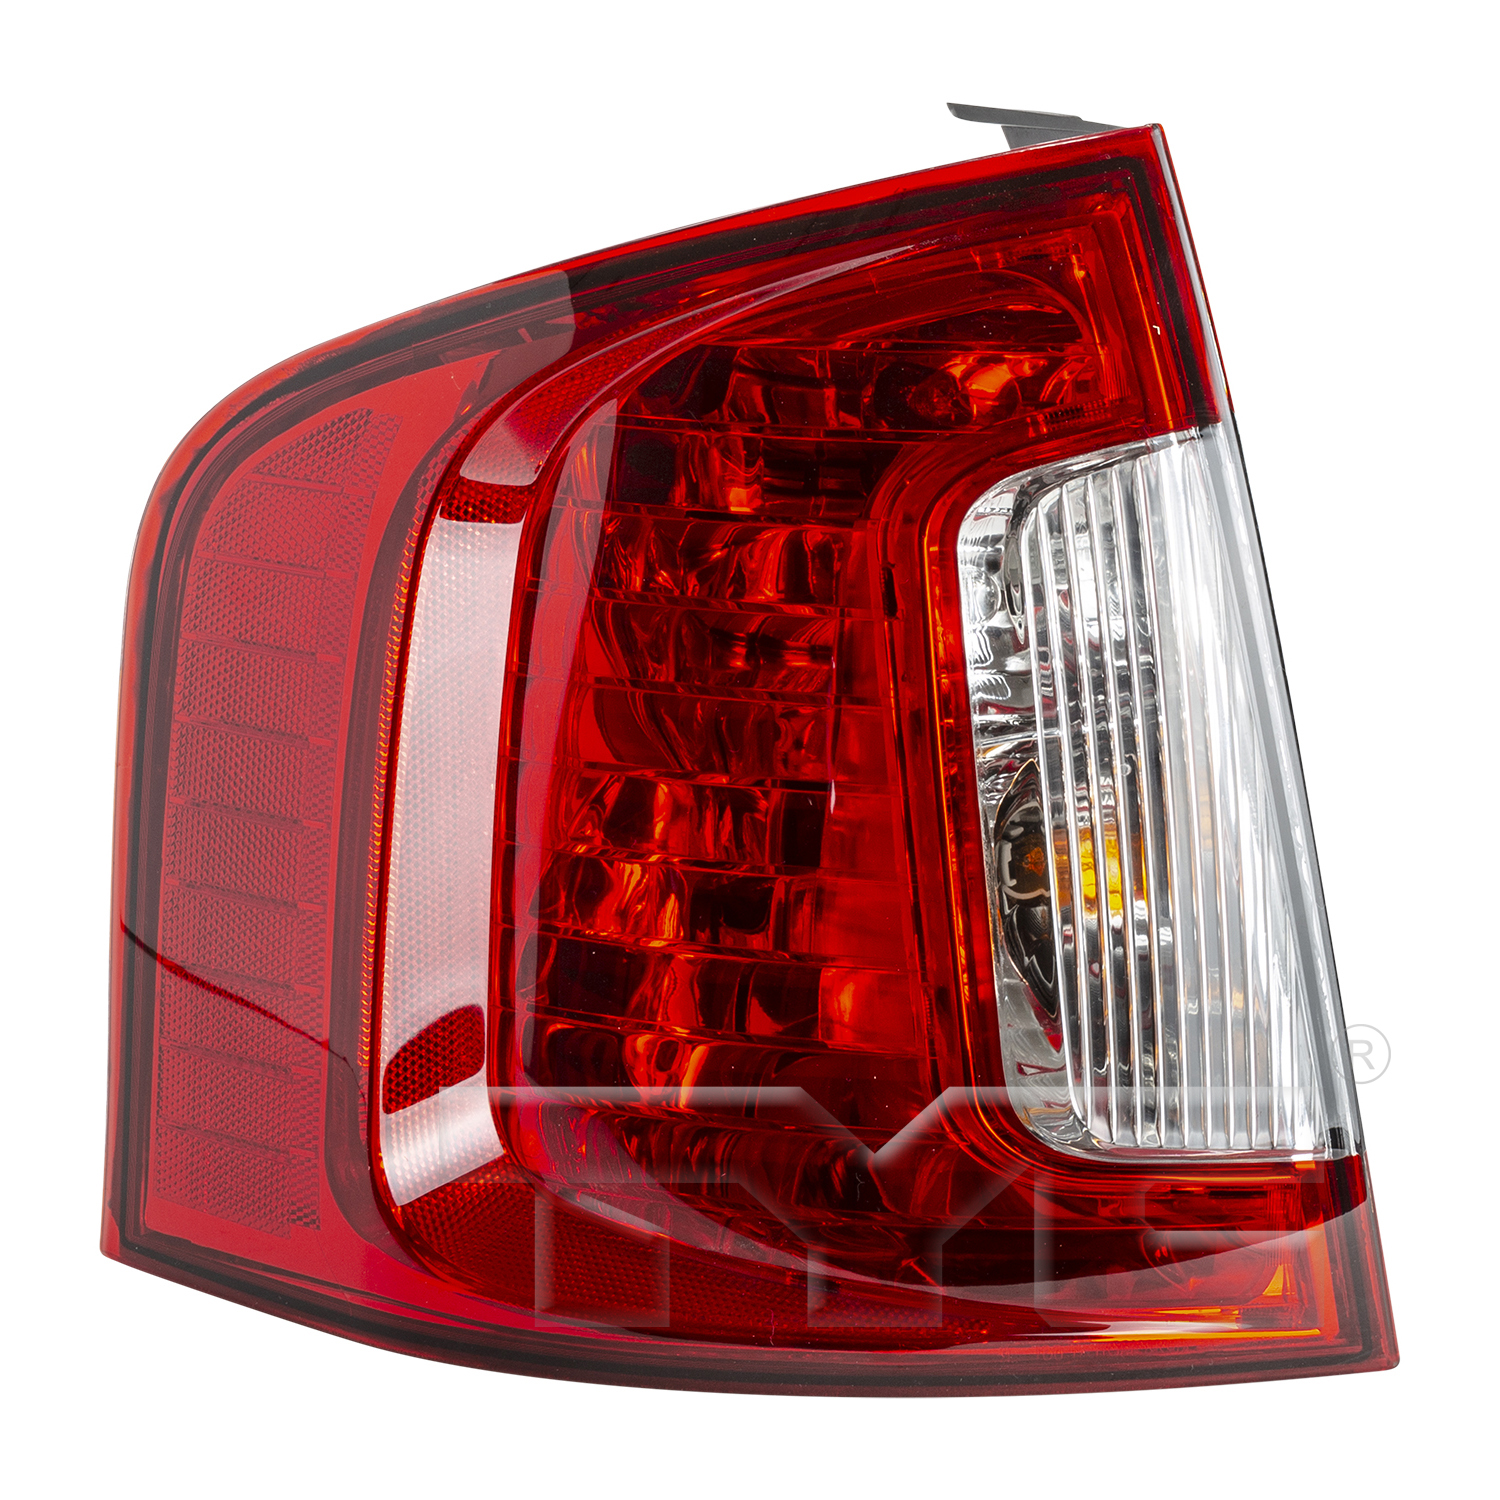 Aftermarket TAILLIGHTS for FORD - EDGE, EDGE,11-14,LT Taillamp assy